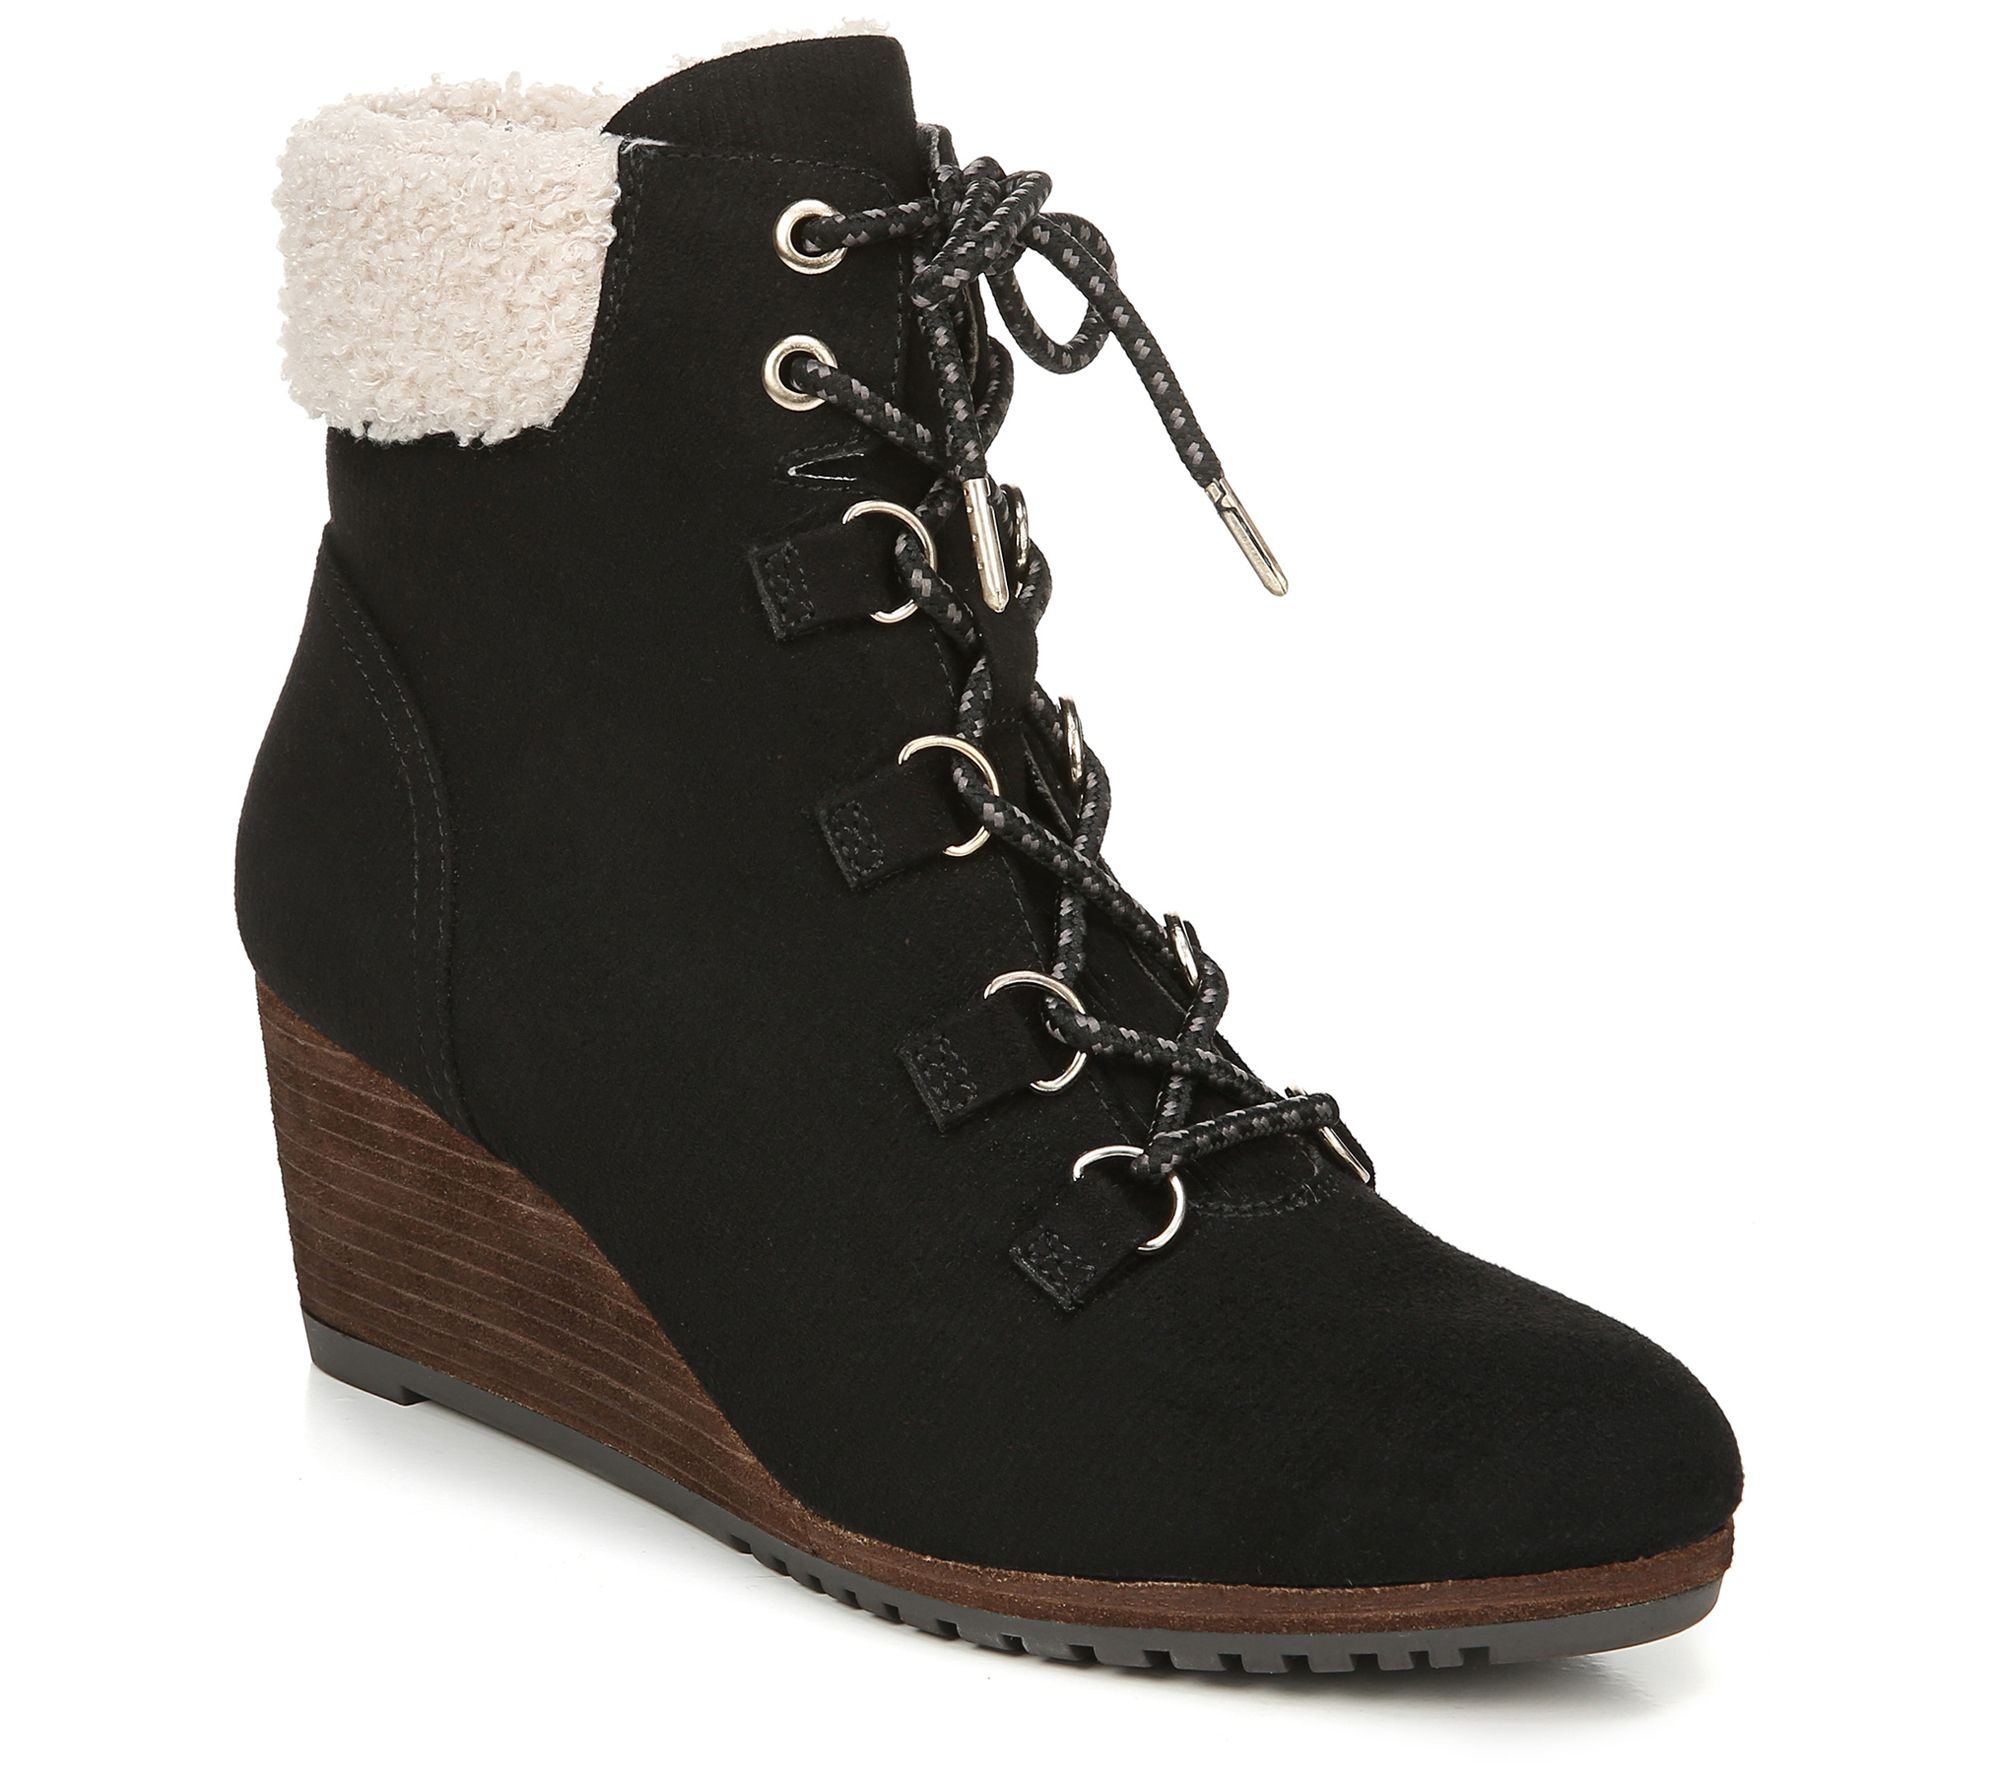 Dr. Scholl's Faux Fur Lace-Up Wedge Booties - Charmer - QVC.com